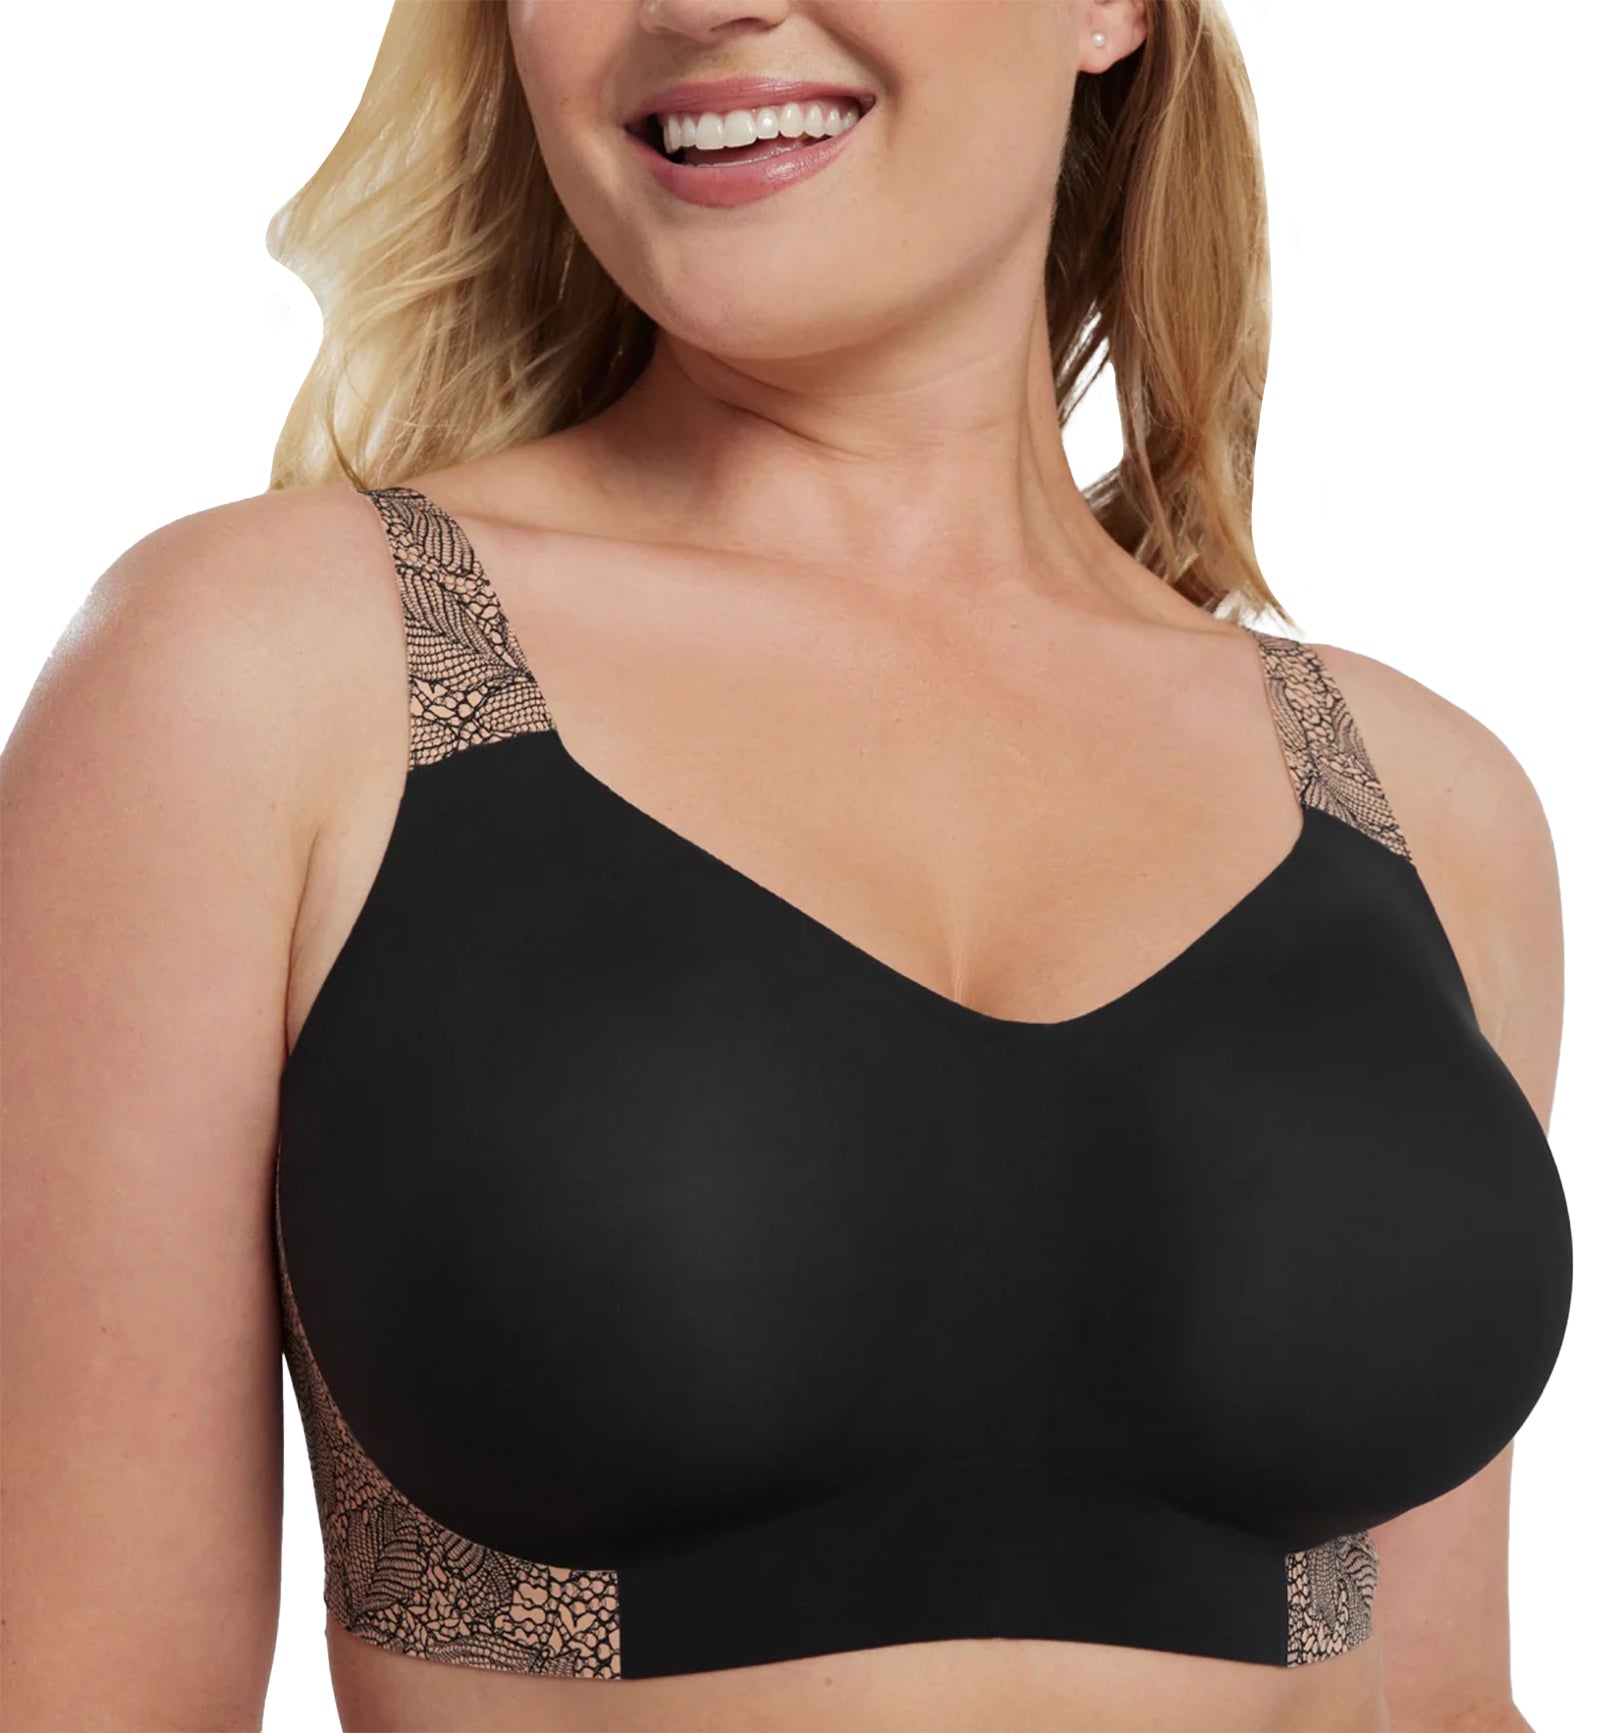 Evelyn & Bobbie BEYOND Adjustable Bra (1732),Small,Black Lace - Black Lace,Small